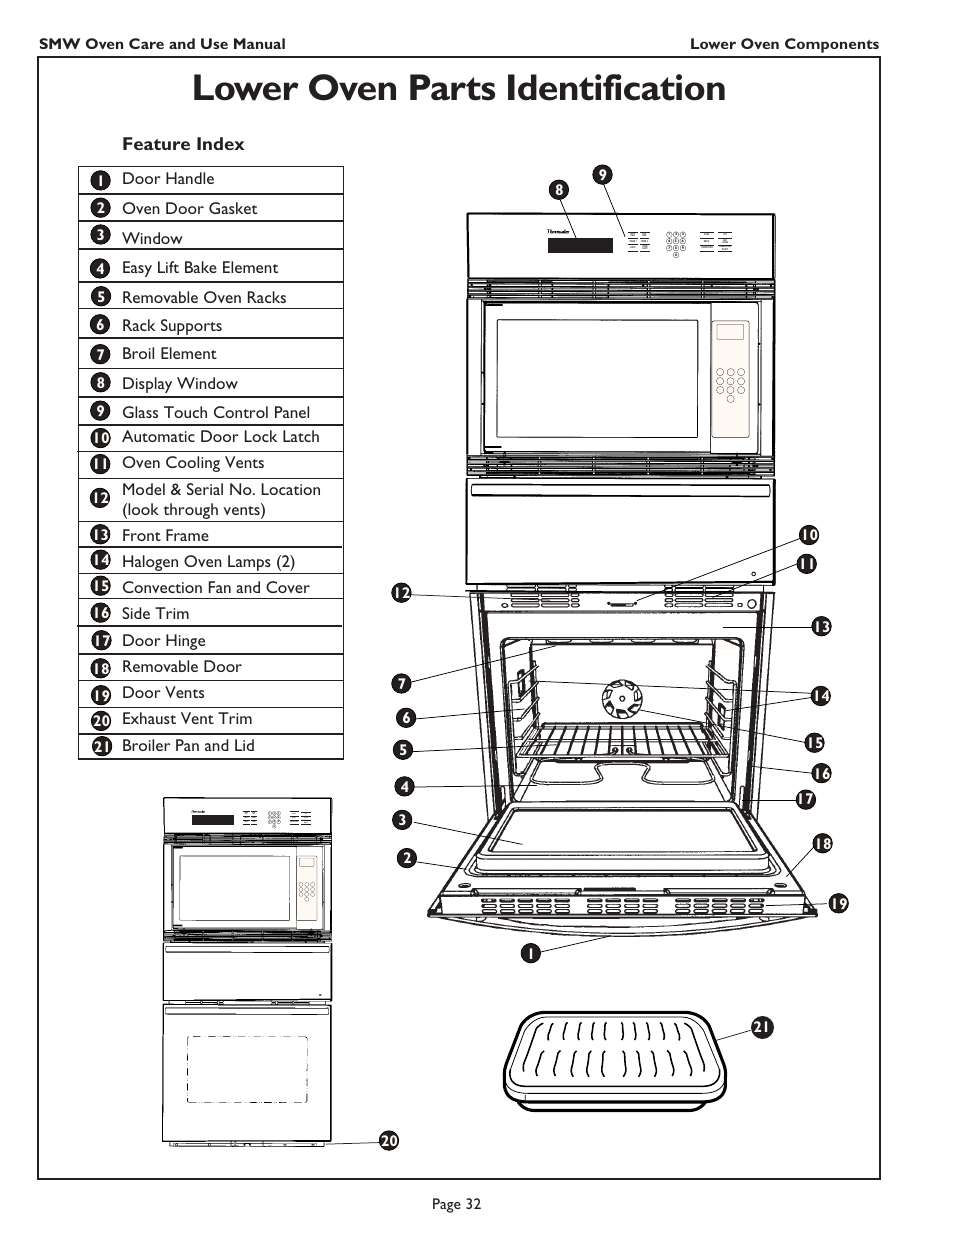 Lower oven parts identification, Feature index, Smw oven care and use